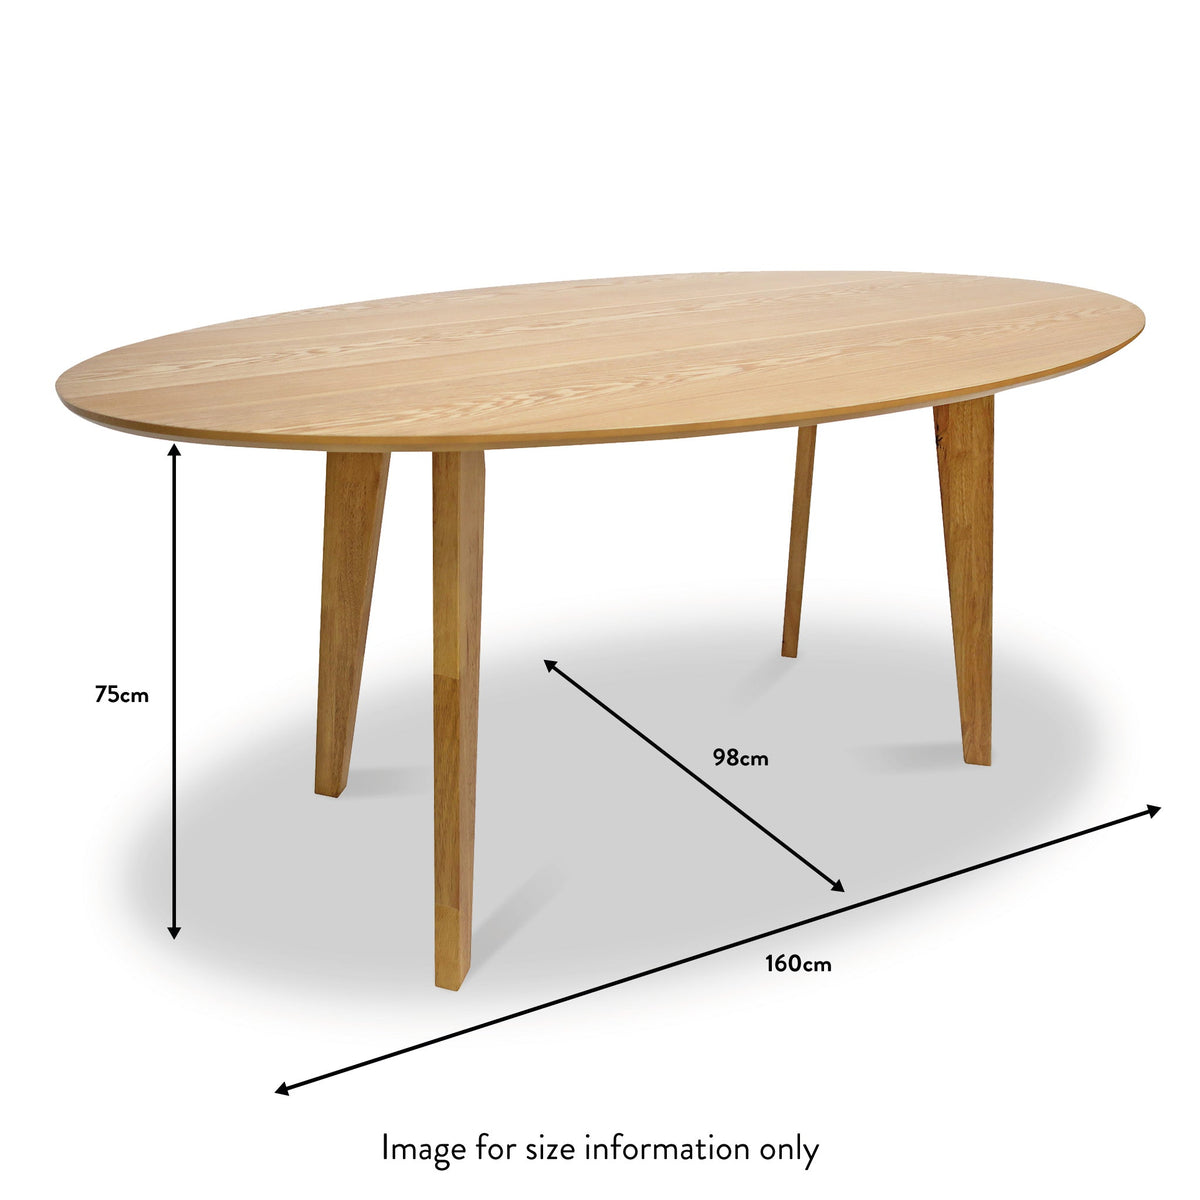 Fabio Wooden Oval Dining Table dimensions